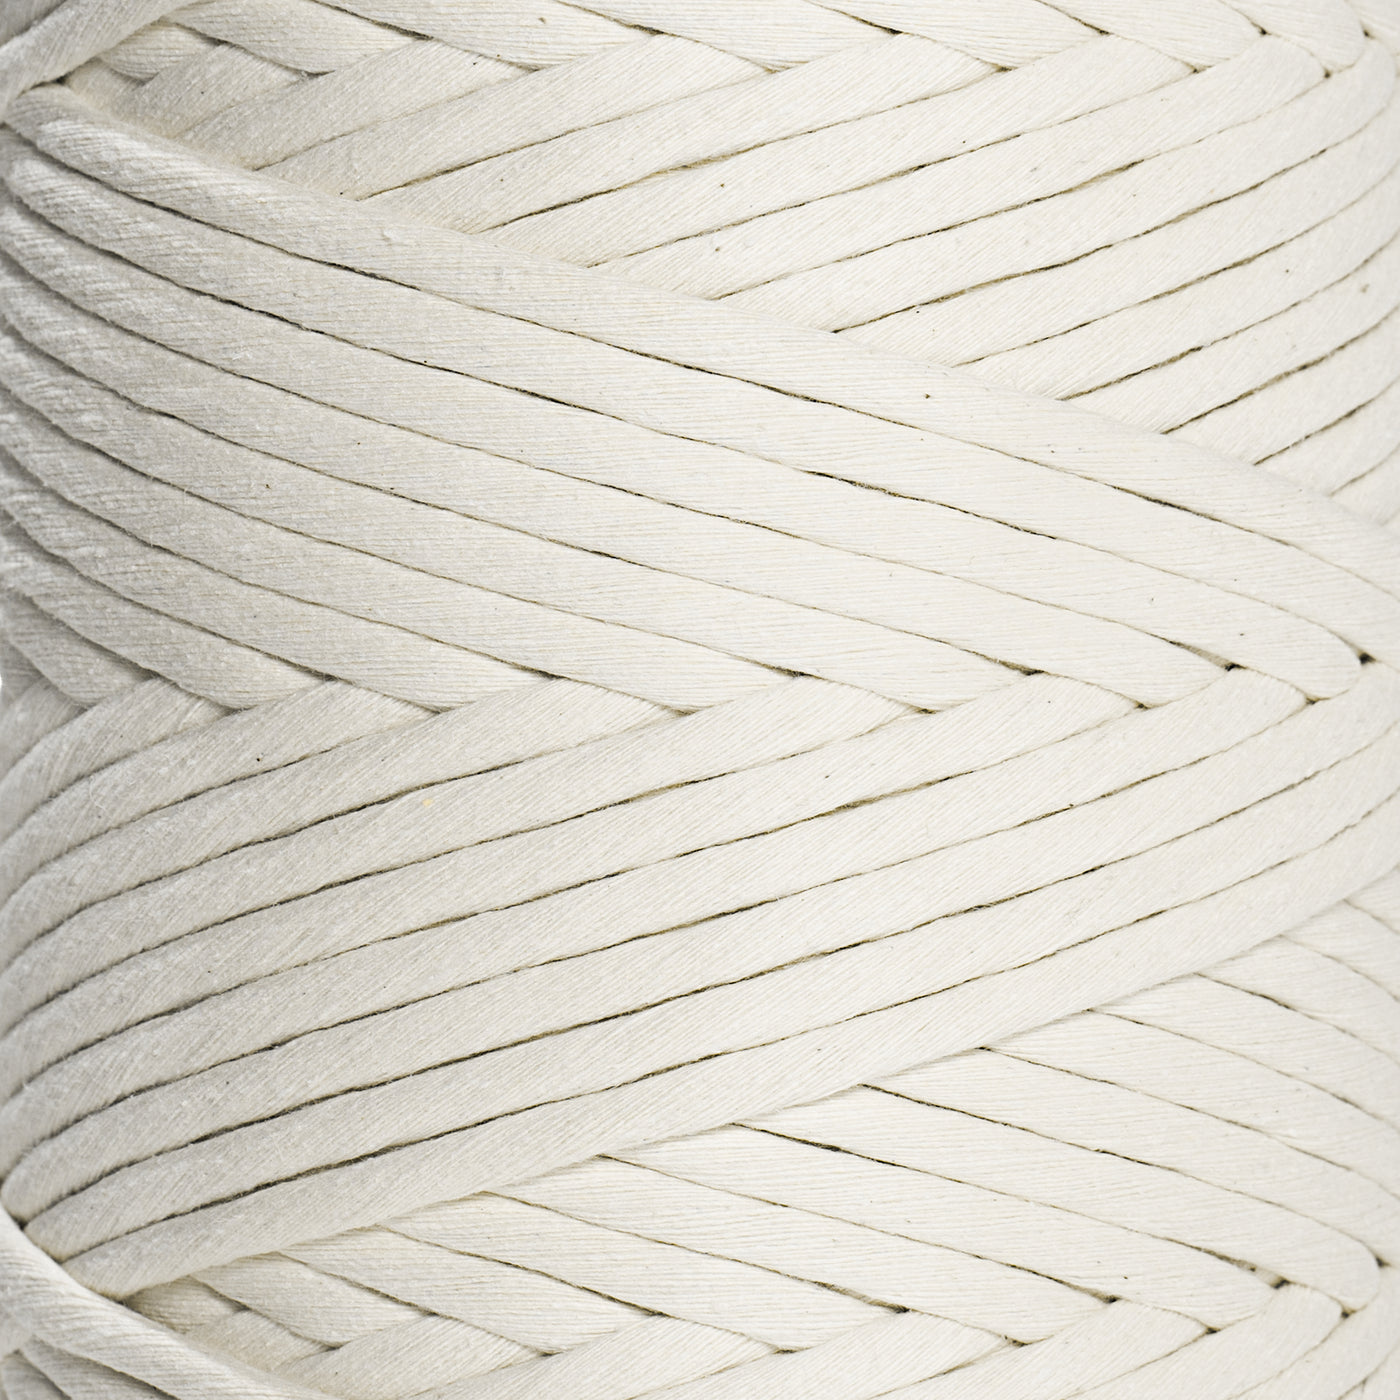 MACRAME COTTON ROPE 5 MM - 3 PLY - NATURAL COLOR – GANXXET